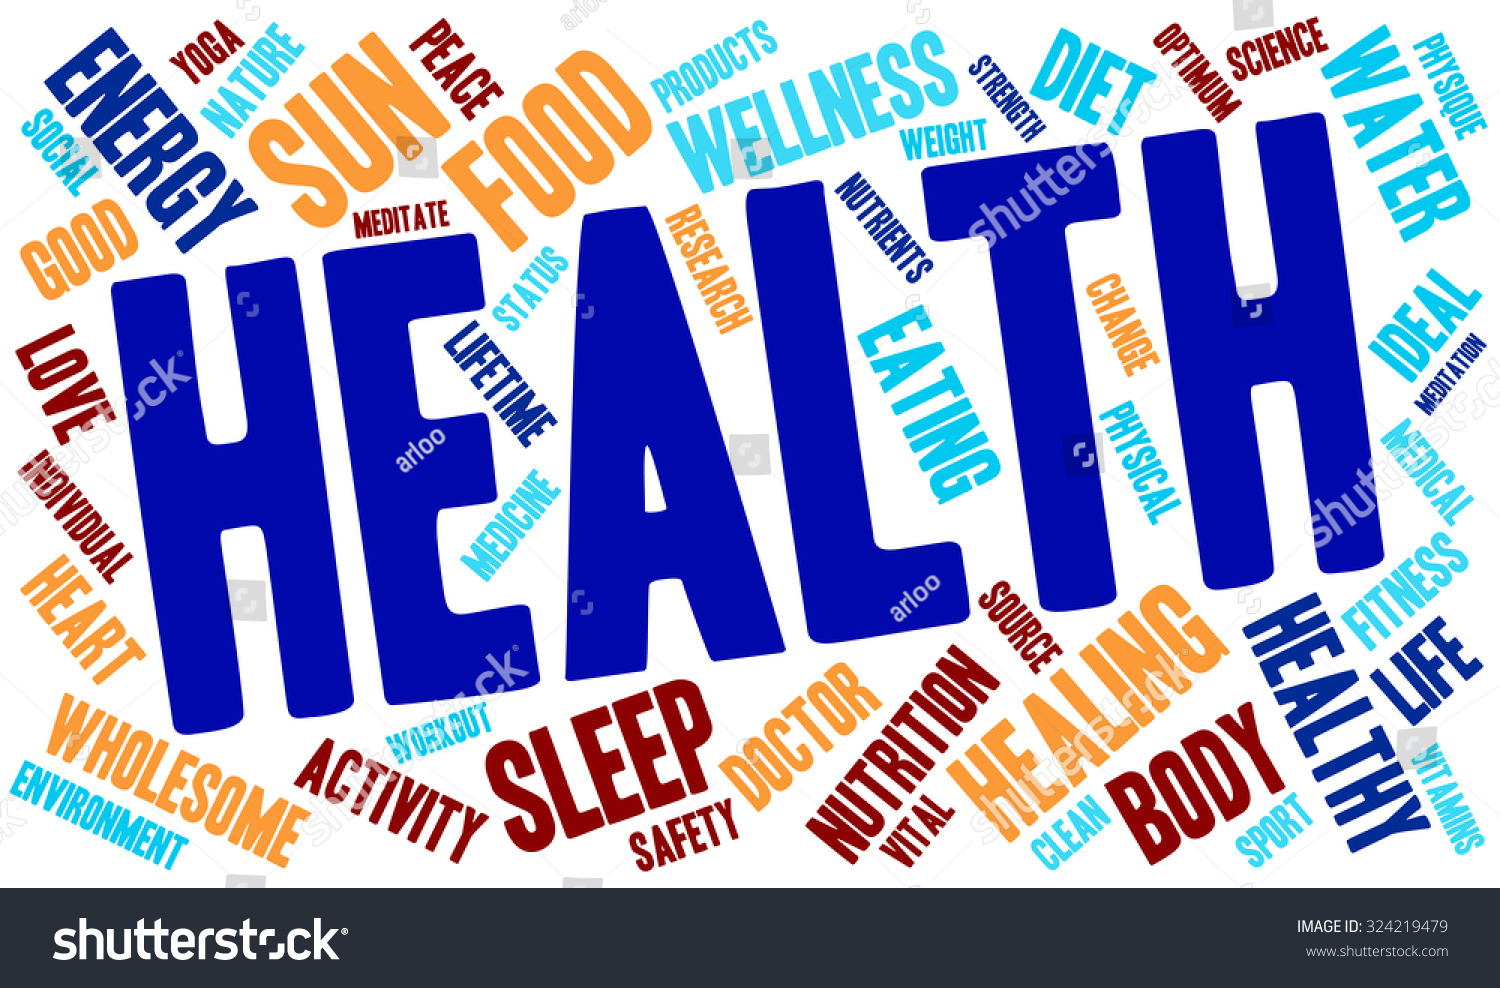 Health Word Cloud On White Background Stock Vector Royalty Free 324219479 Shutterstock 7049